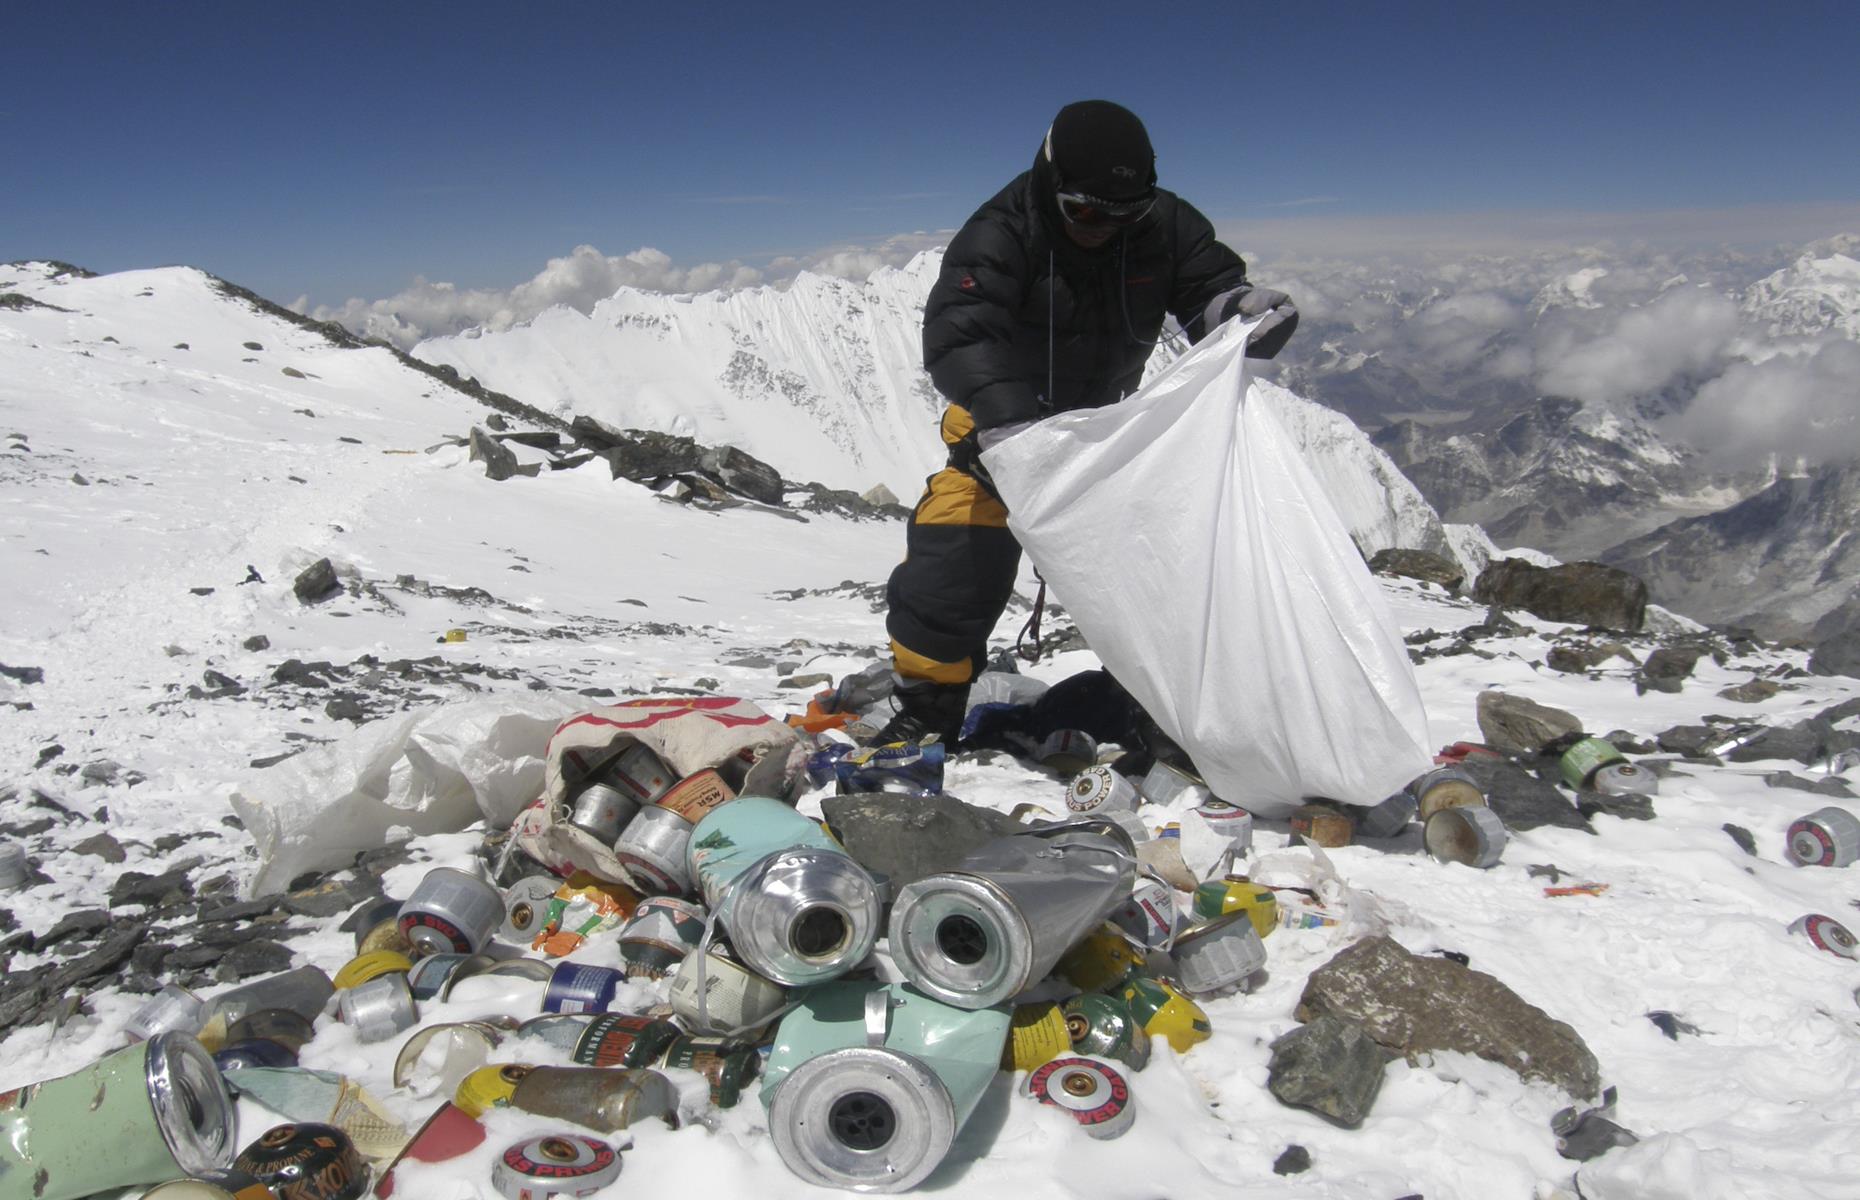 <p>In 2022, some 690 paying climbers reached the summit and thousands more trekked around the mighty peak. Unfortunately, this boom in tourism has left Mount Everest covered in debris too – huge piles of rubbish are left behind on the mountain, not to mention human waste and sadly some bodies. The overuse of trekking poles is also eroding the terrain and a dependence on tourism has changed the face of many Himalayan villages.</p>